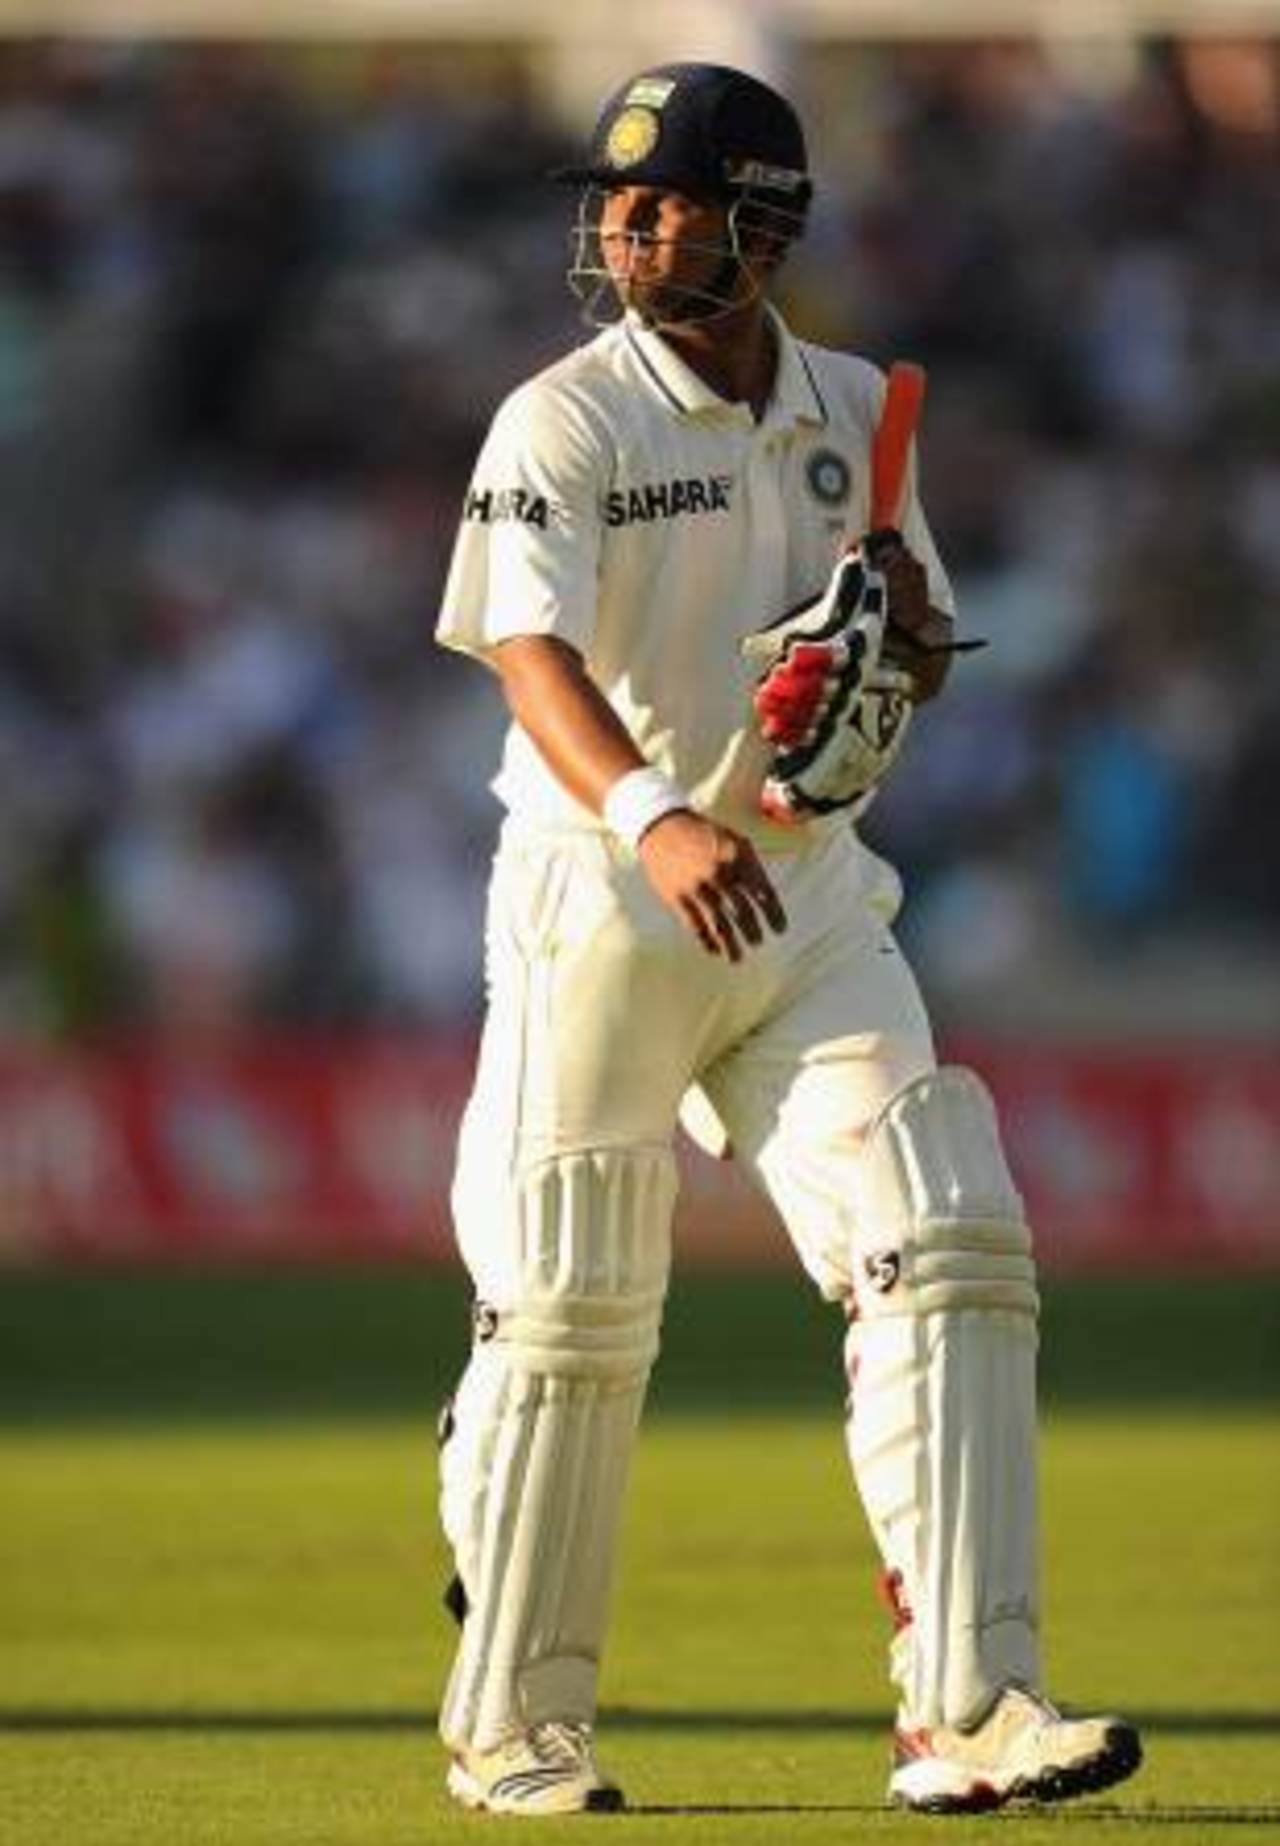 Suresh Raina was stumped for a duck, England v India, 4th Test, The Oval, 3rd day, August 20, 2011